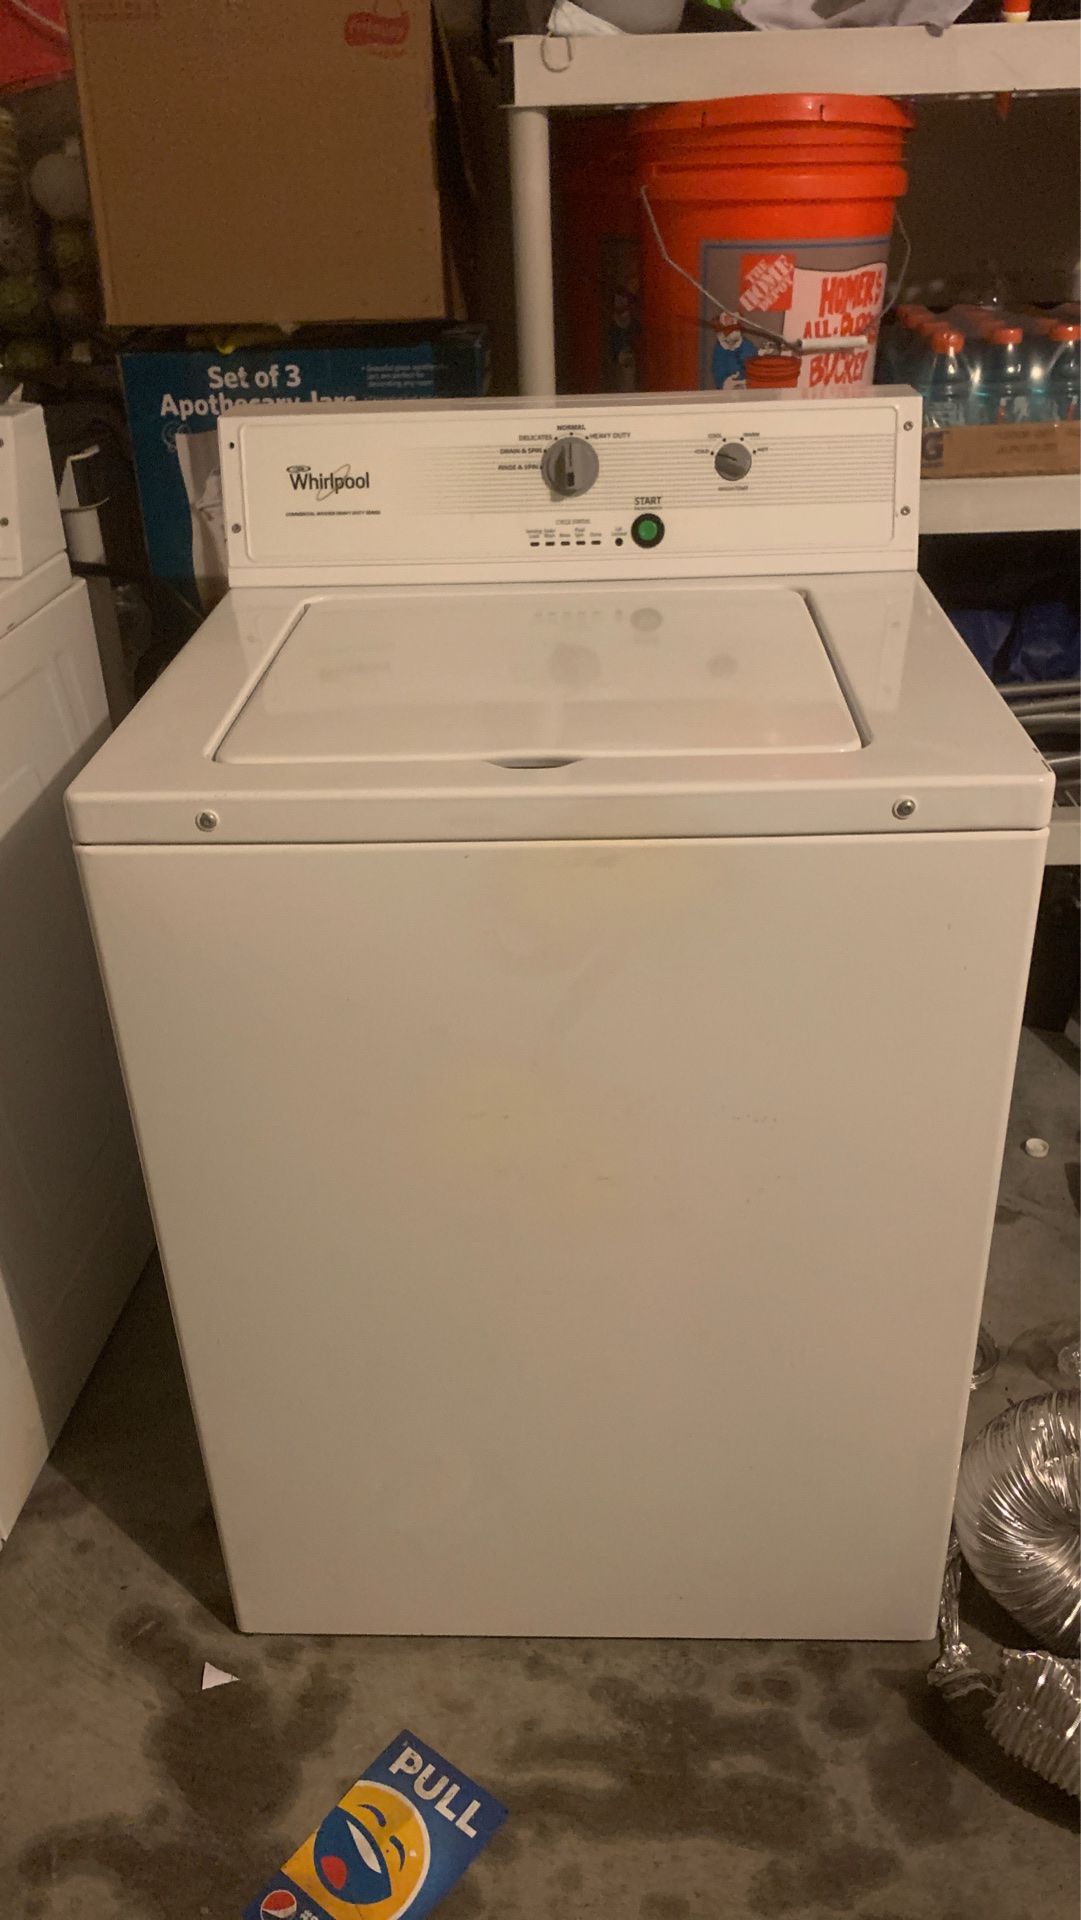 Whirlpool washer and electric dryer, like new. Washing and drying machines. Great quality, Clean and ready to go. Set combo pair. Delivery is an opti